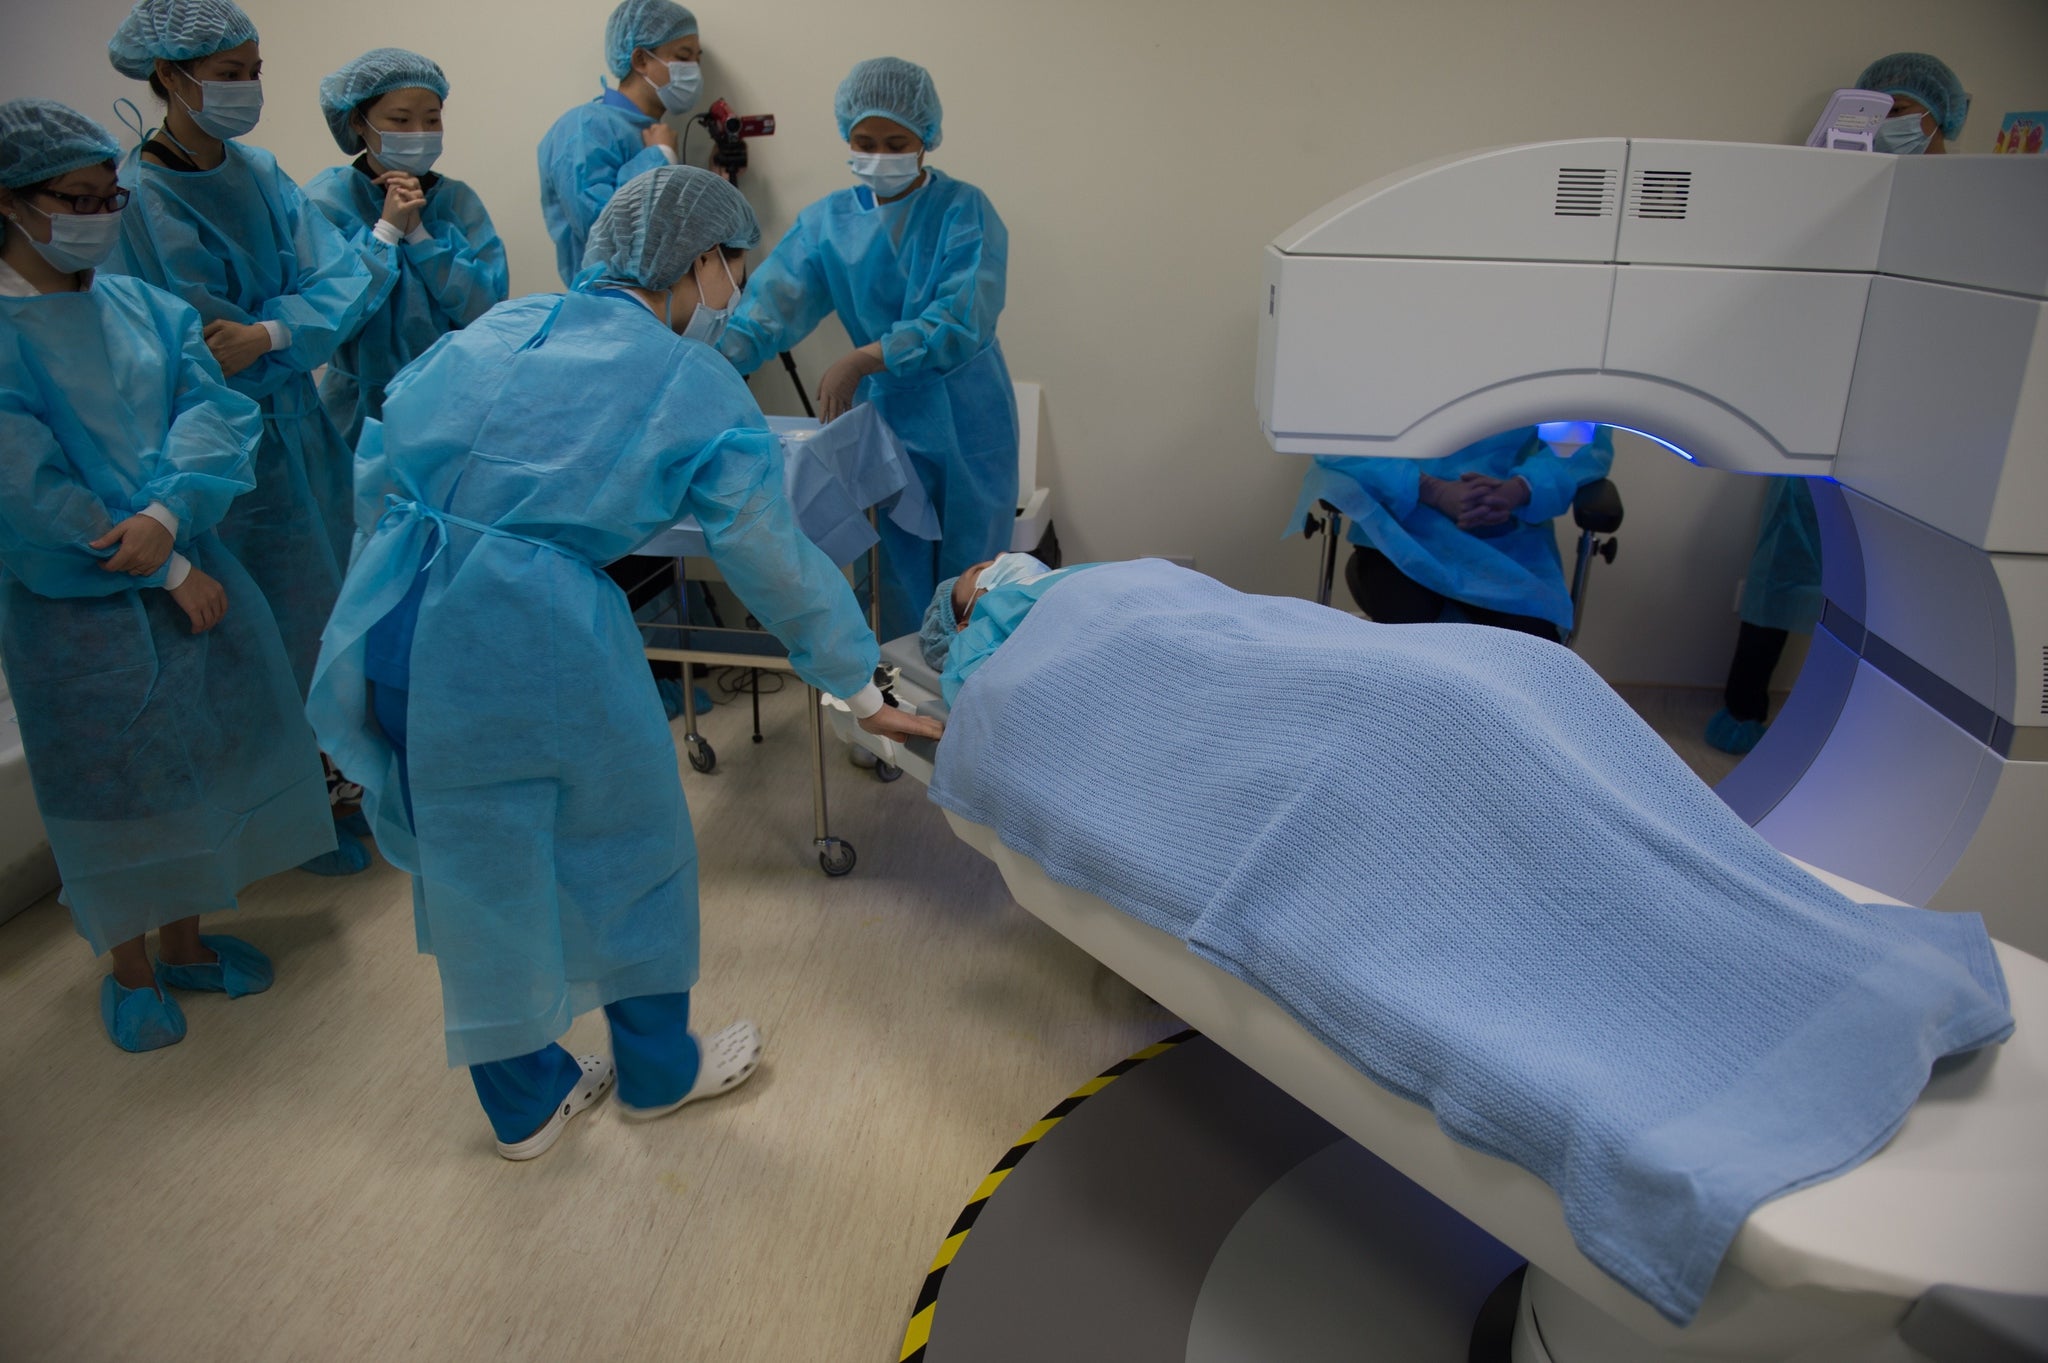 Staff prepare to treat a patient with laser surgery.